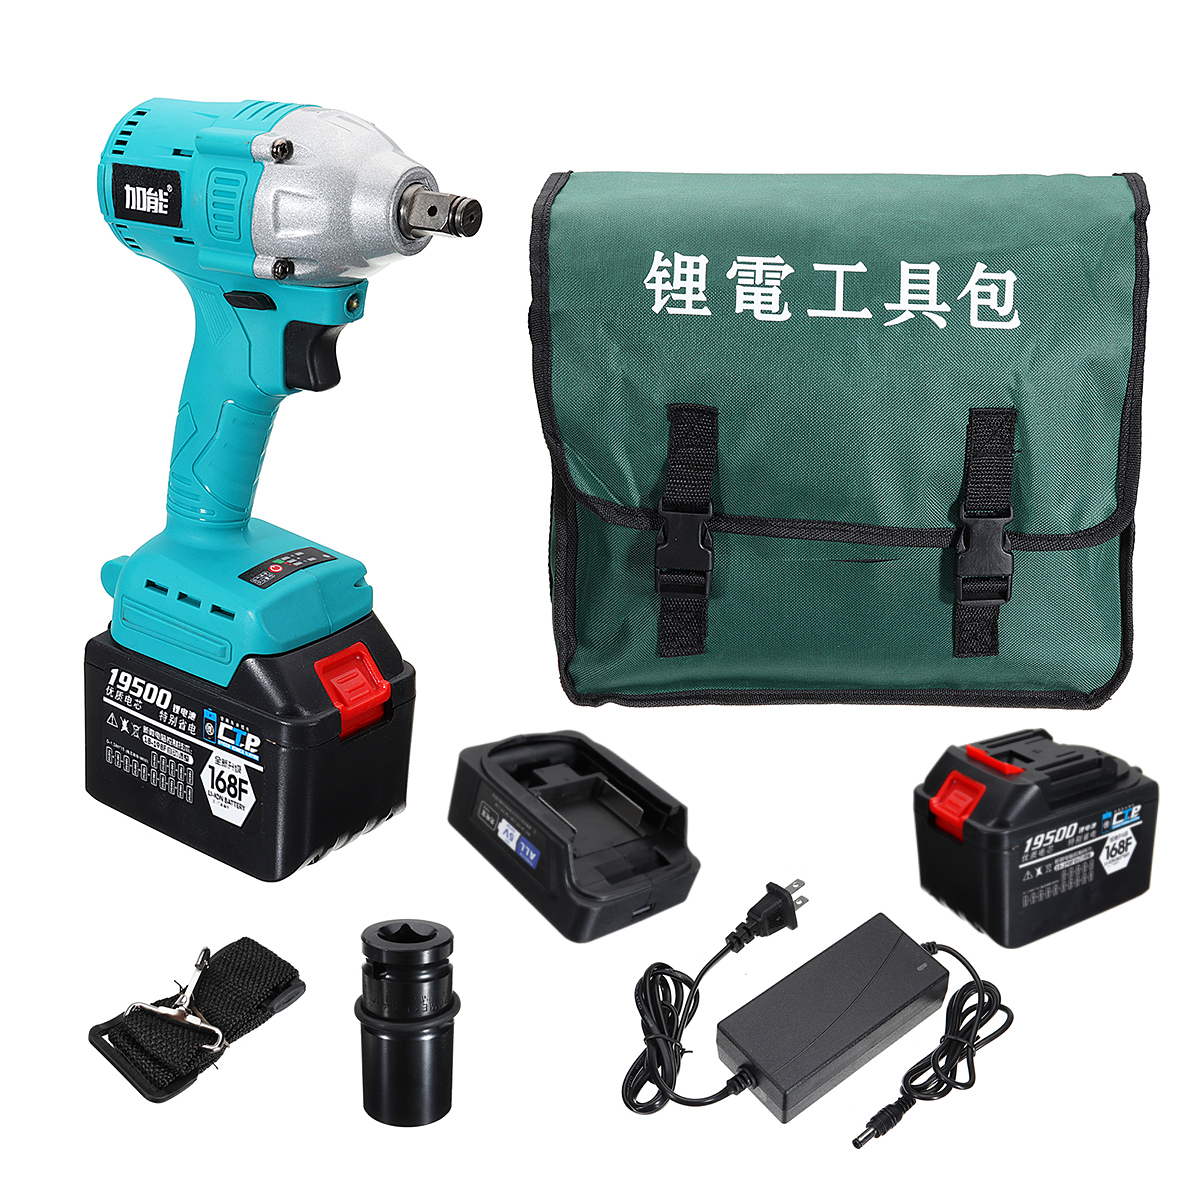 Multifunctional-Brushless-Electric-Wrench-Lithium-Power-Wrench-350Nm-Wrench-Tool-Kit-1333196-6